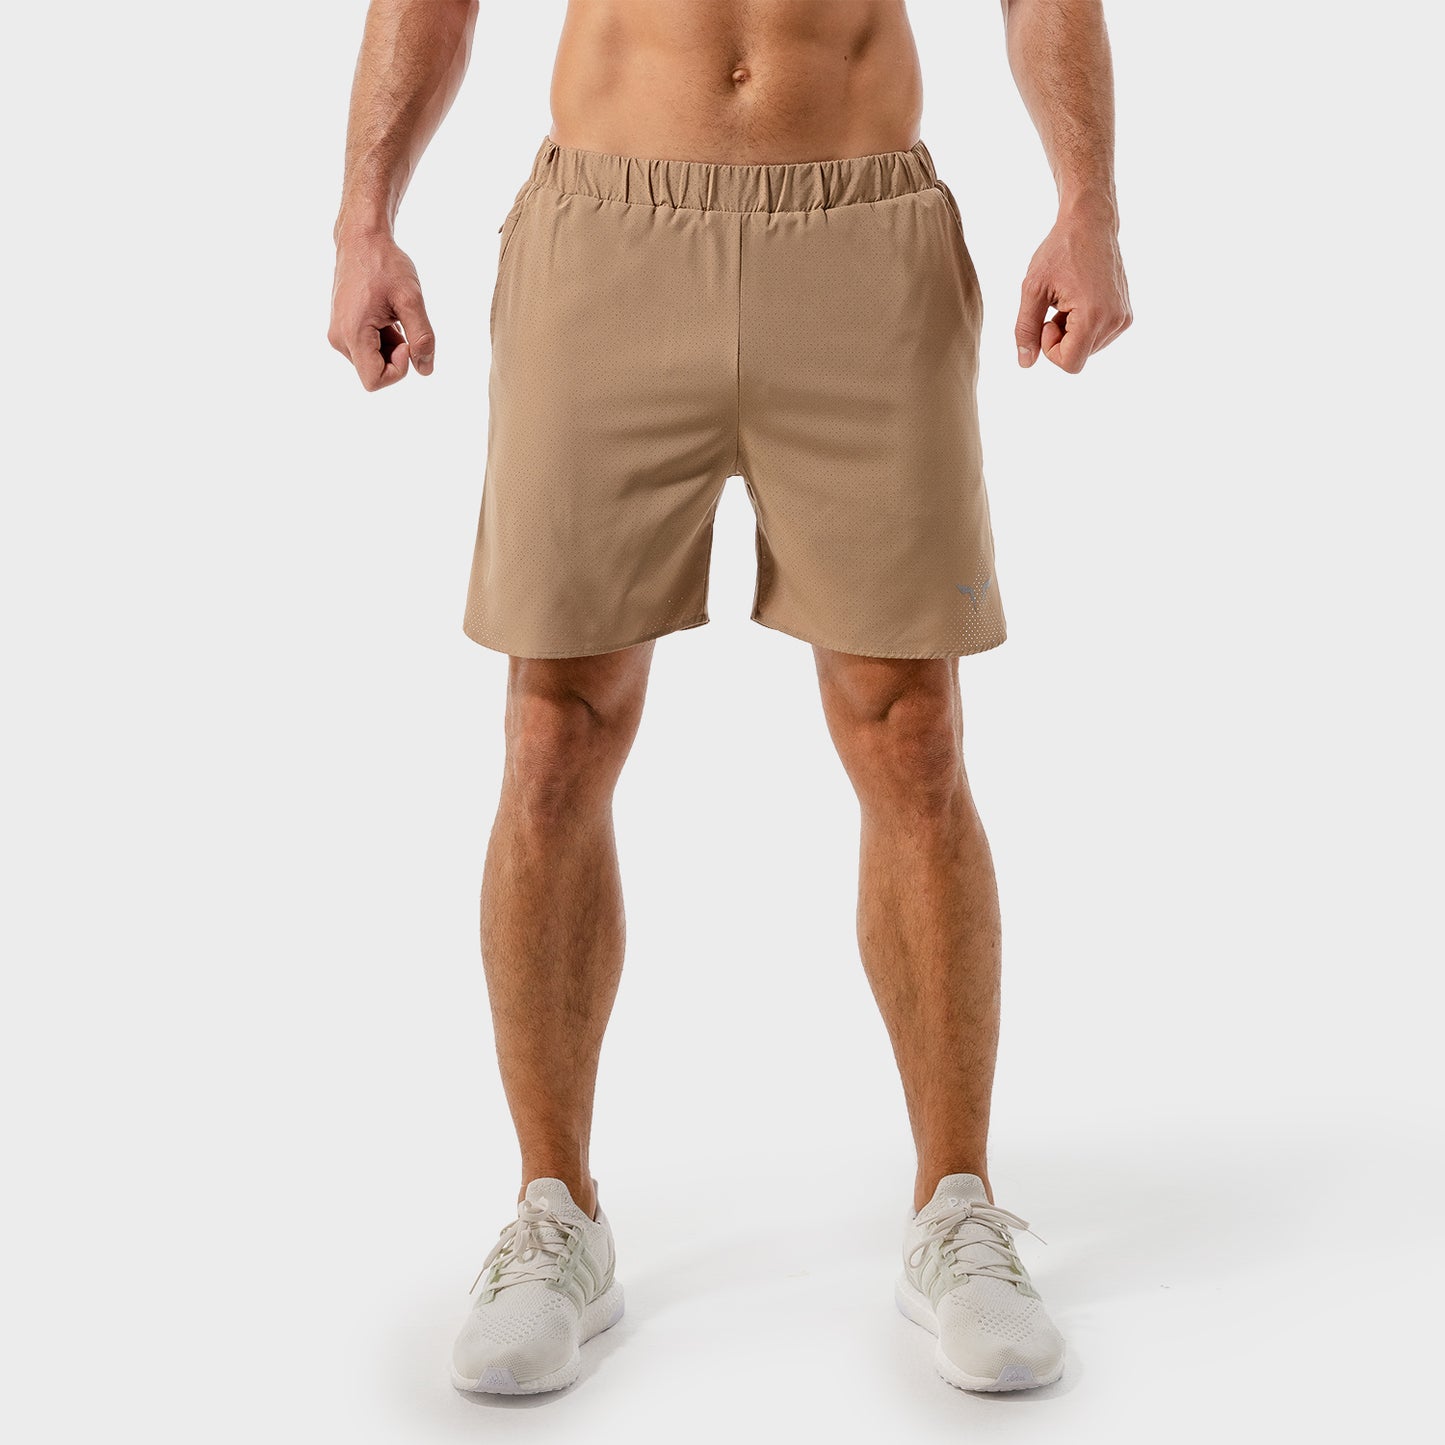 squatwolf-gym-wear-2-in-1-dry-tech-shorts-brown-workout-shorts-for-men